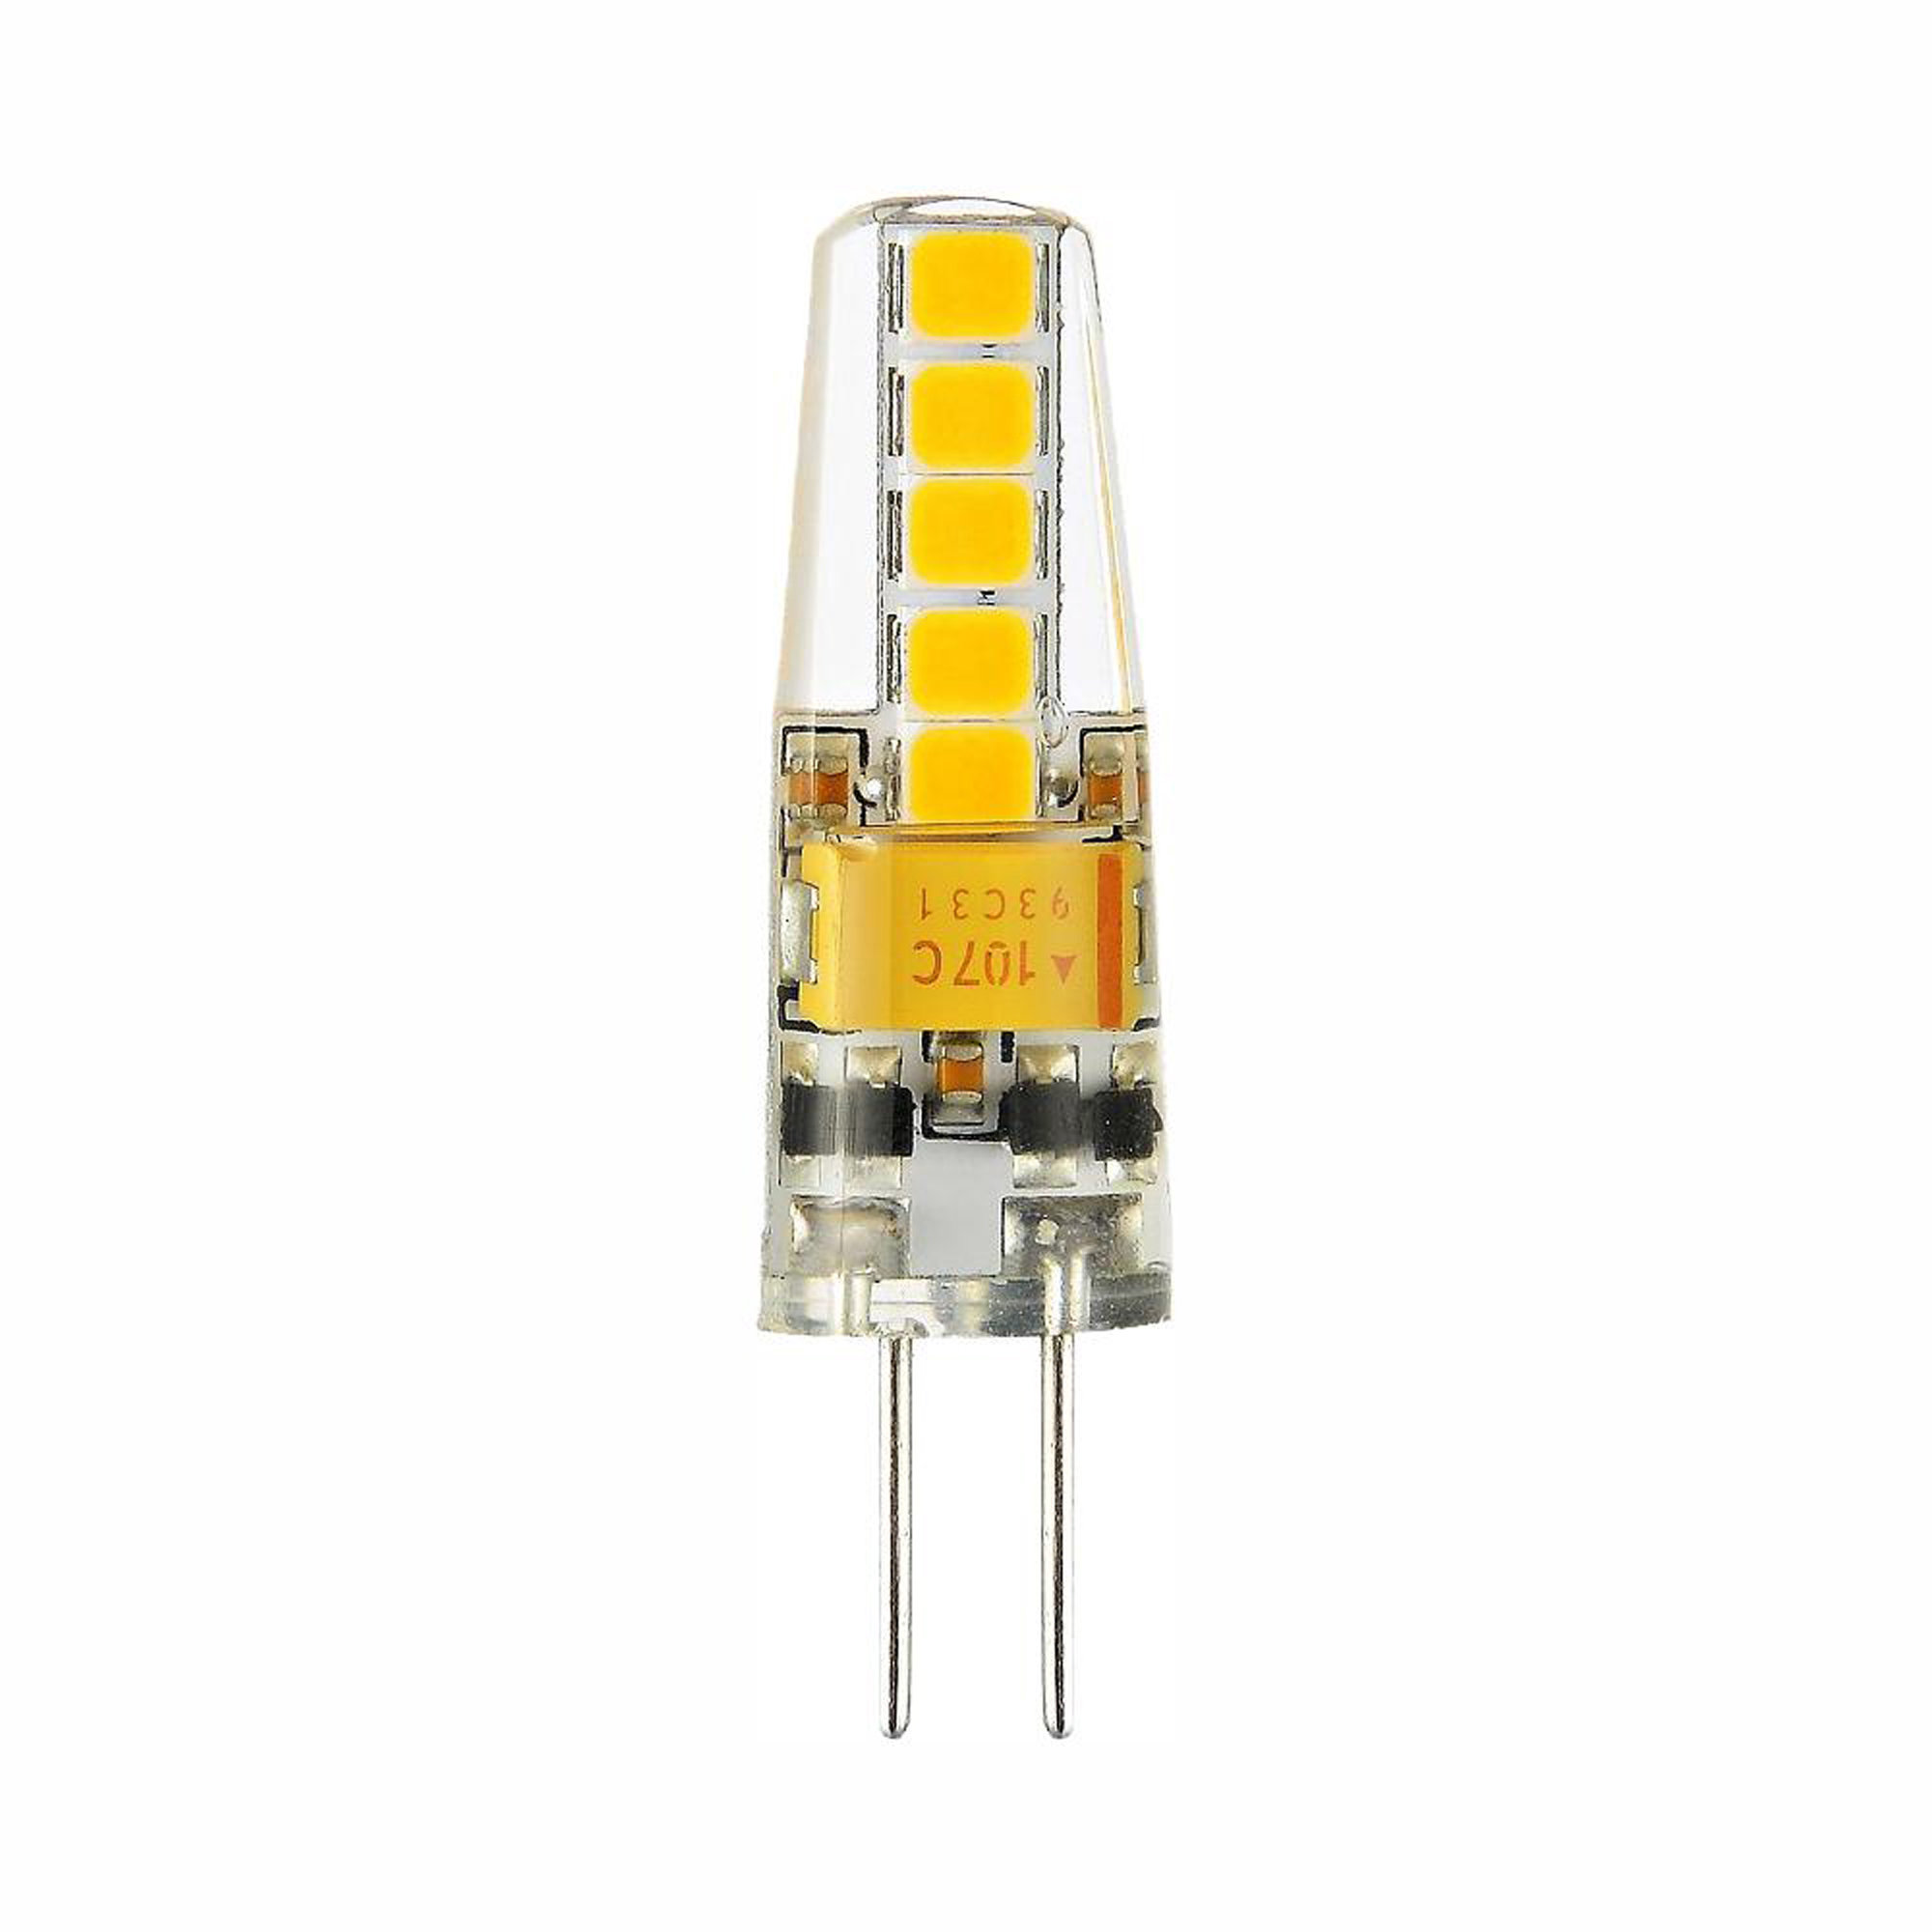 CWILighting Equivalent G4 Dimmable 4000K LED Bulb